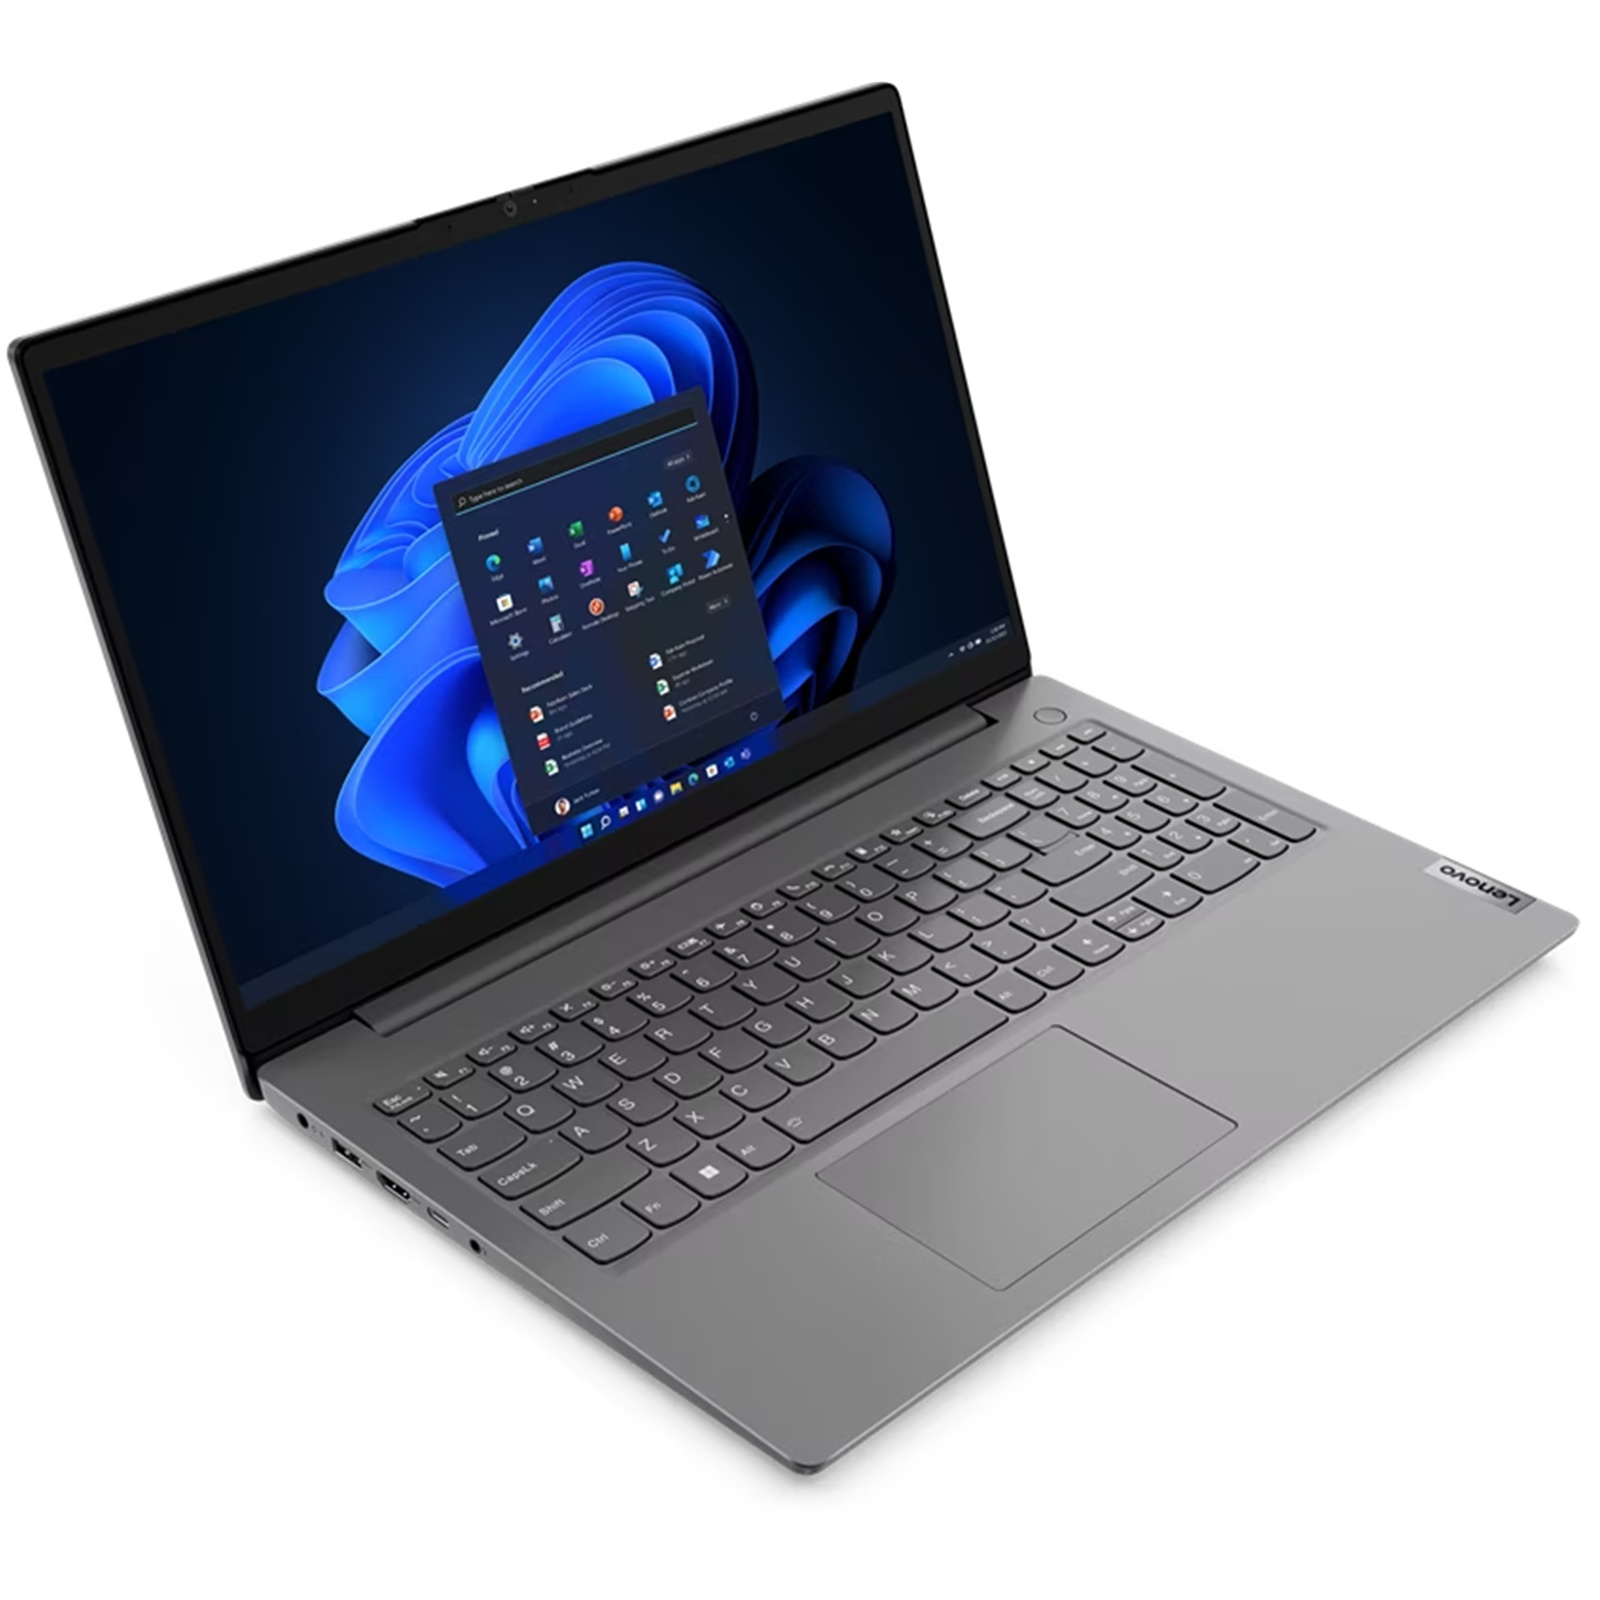 Buy the Latest Lenovo V15 G3 15.6" Notebook - Full HD - 1920 x 1080 - Intel Core i5 12th Gen i5-1235U Deca-core (10 Core) 1.30 GHz - 8 GB Total RAM - 256 GB SSD - Business Black Now online at Machito Gadgets